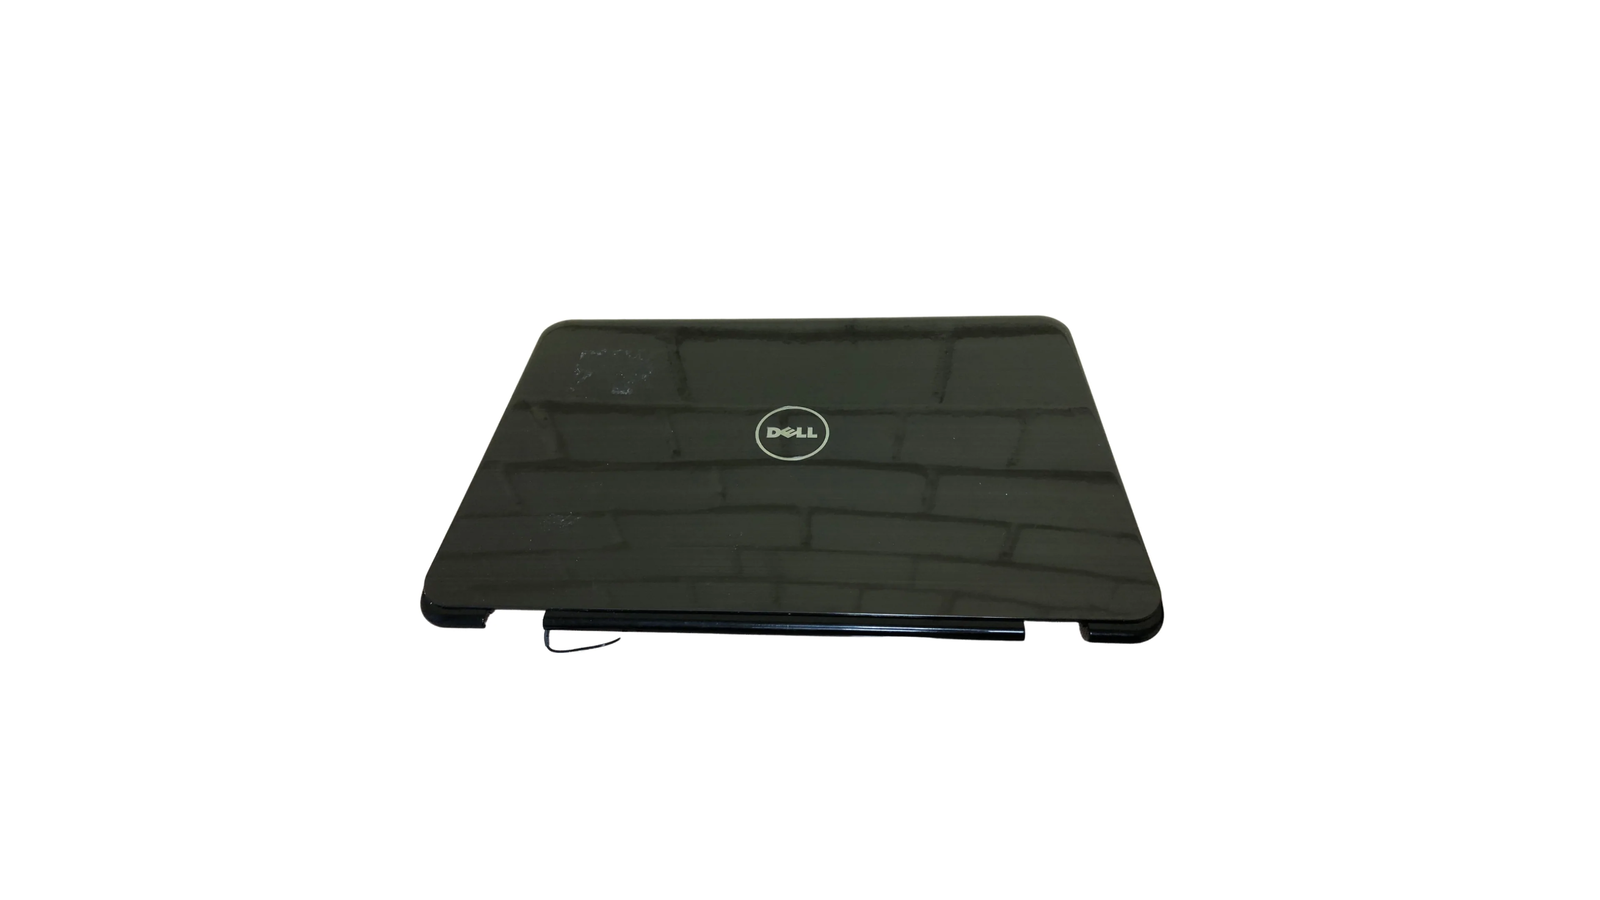 09J2pJ top cover for Dell Inspiron N5010